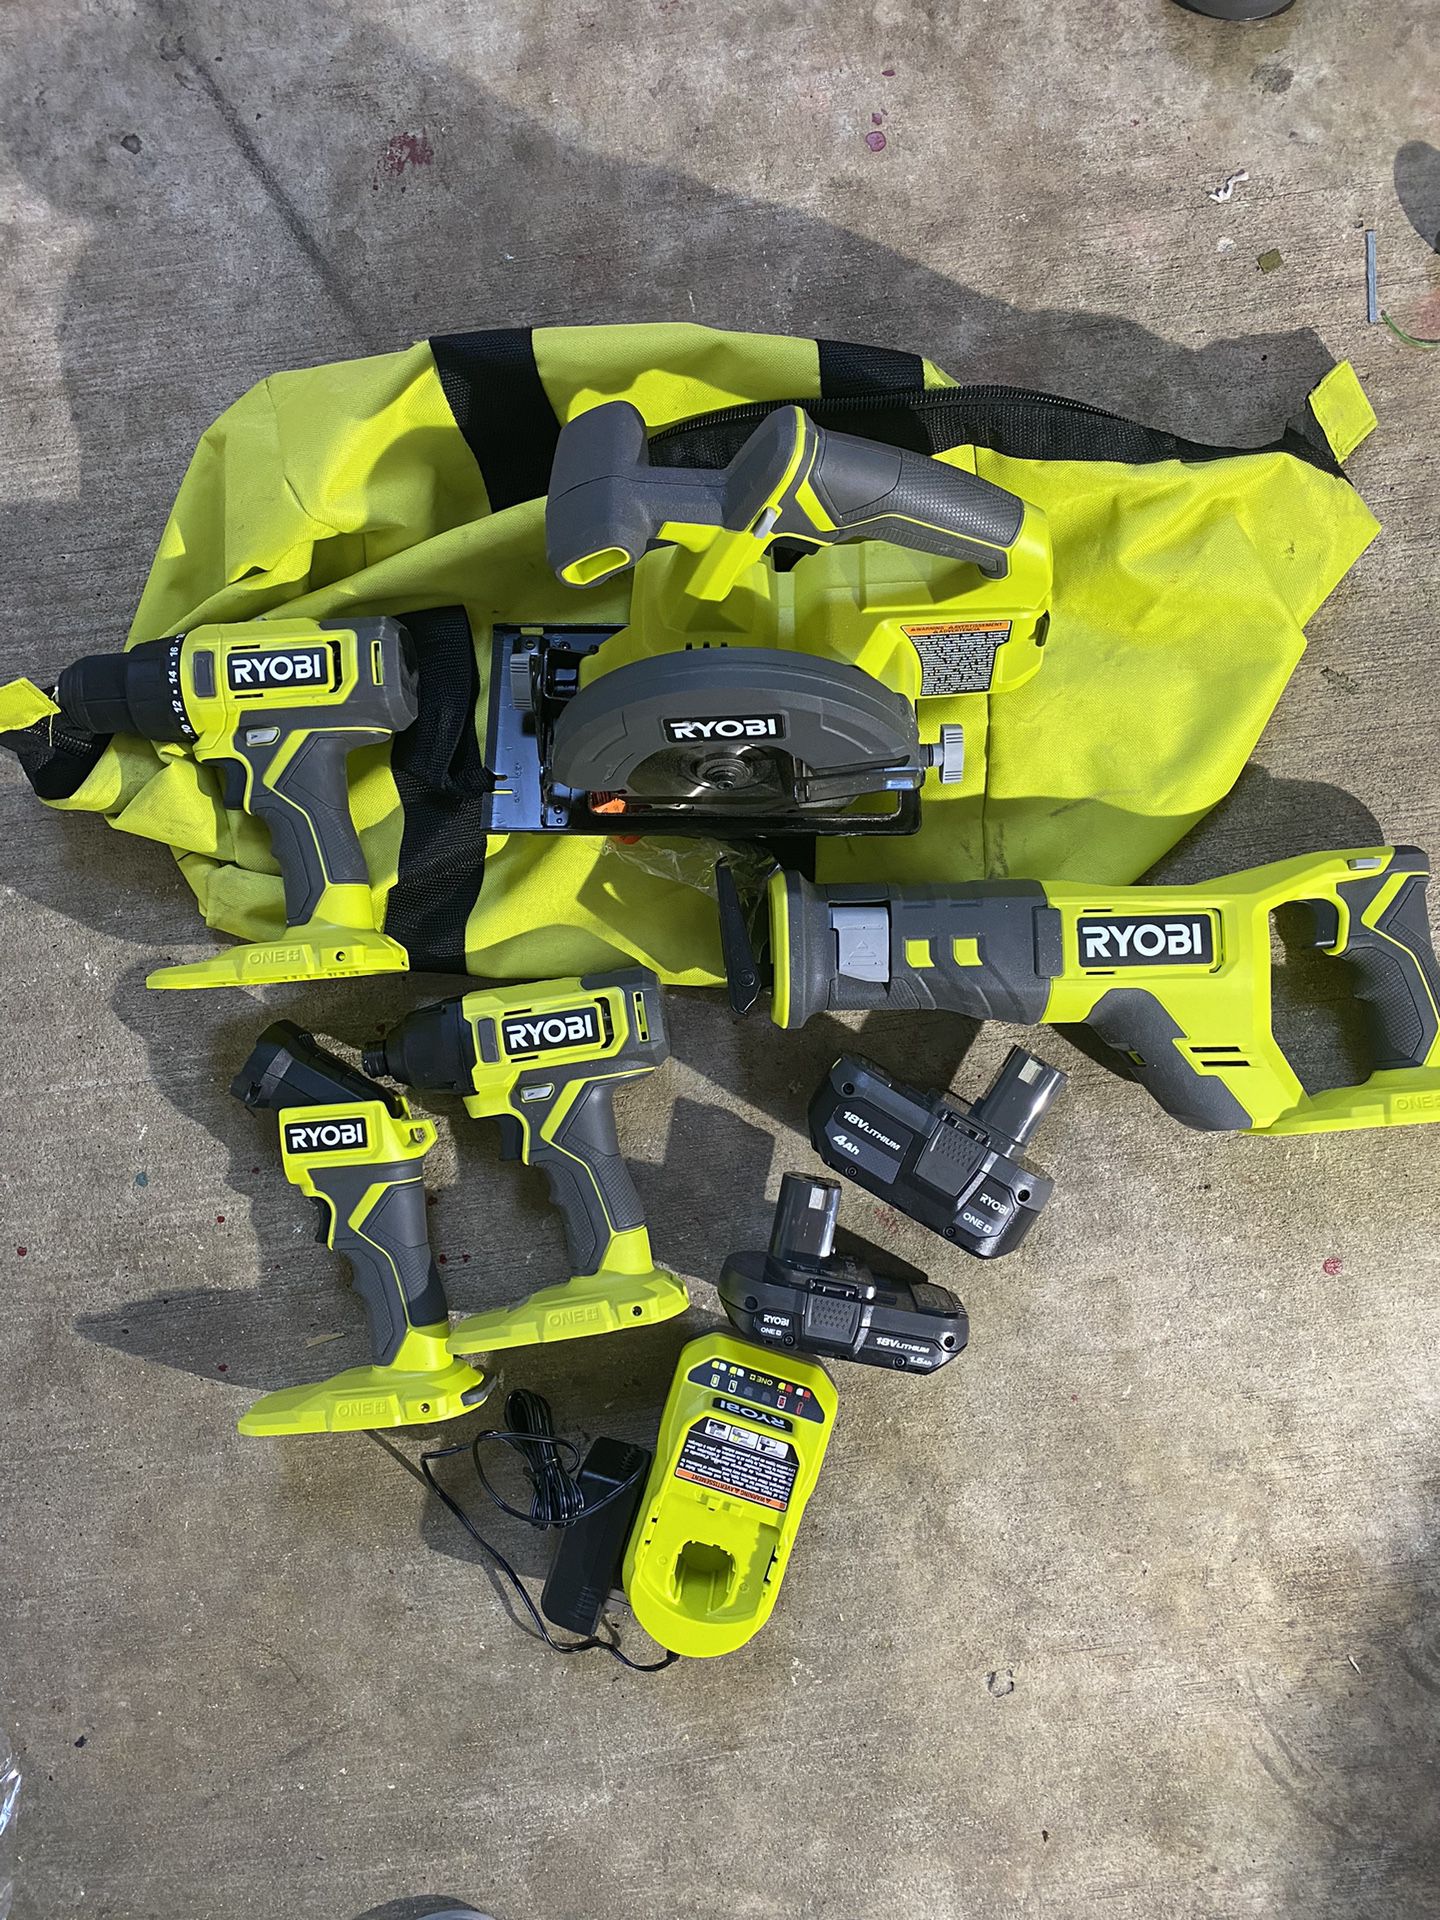 RYOBI ONE+ 18V Cordless 5-Tool Combo Kit with 1.5 Ah Battery, 4.0 Ah  Battery, and Charger for Sale in Houston, TX OfferUp